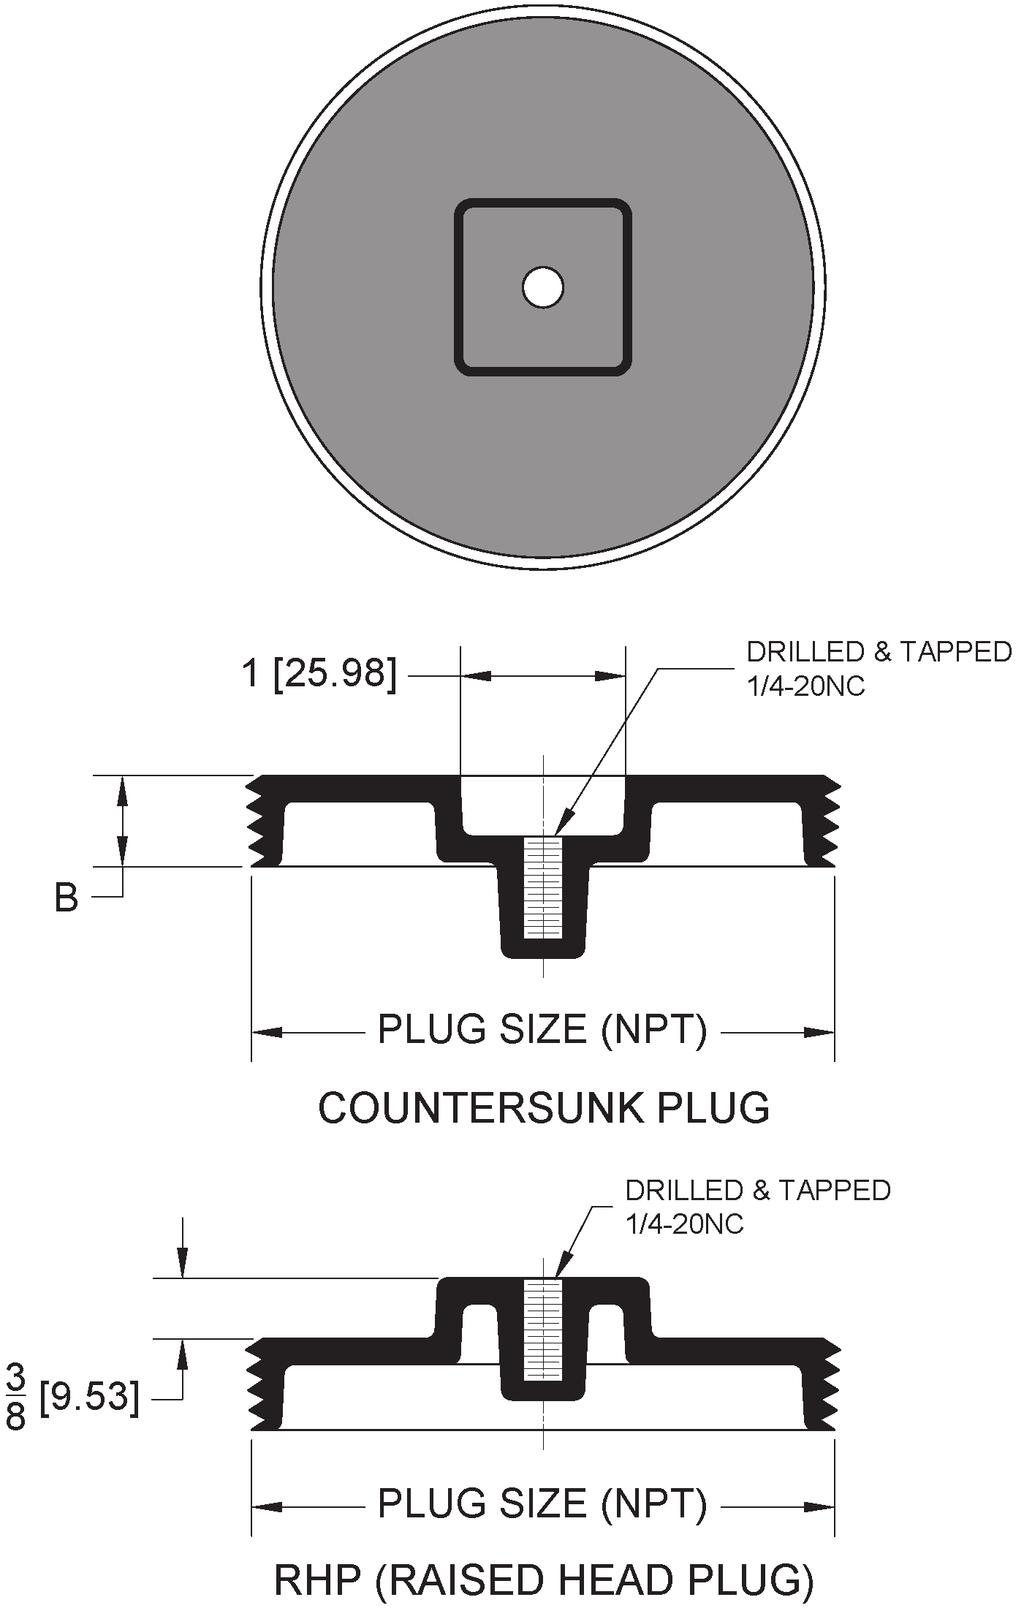 00 228.00 1.5 6" 1" 666.00 245.00 3.0 8" 1" 1366.00 N/A 7.0 Regularly Furnished: ABS plastic countersunk plug, tapped for screw.